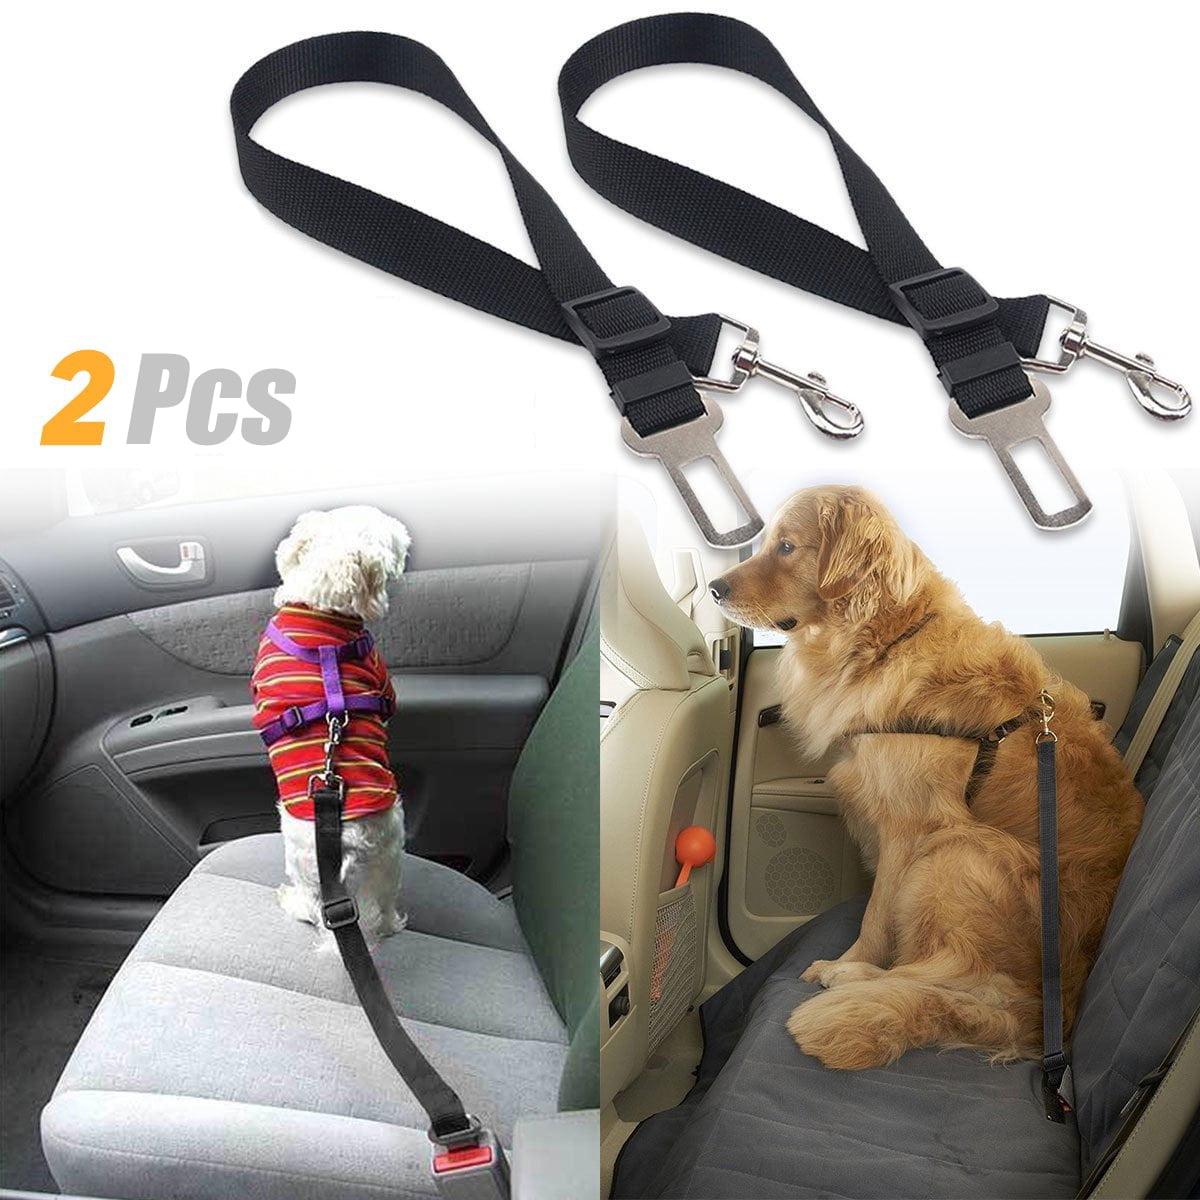 Adjustable Car Safety Seat Belts for Pet Dogs & Cats Universal Pets Seat Belt Tether Restraint Harness Seat Belt Travel Clip Vehicle Auto Seatbelt Safe Buckle Durable Nylon Safety Leads,2PCS 